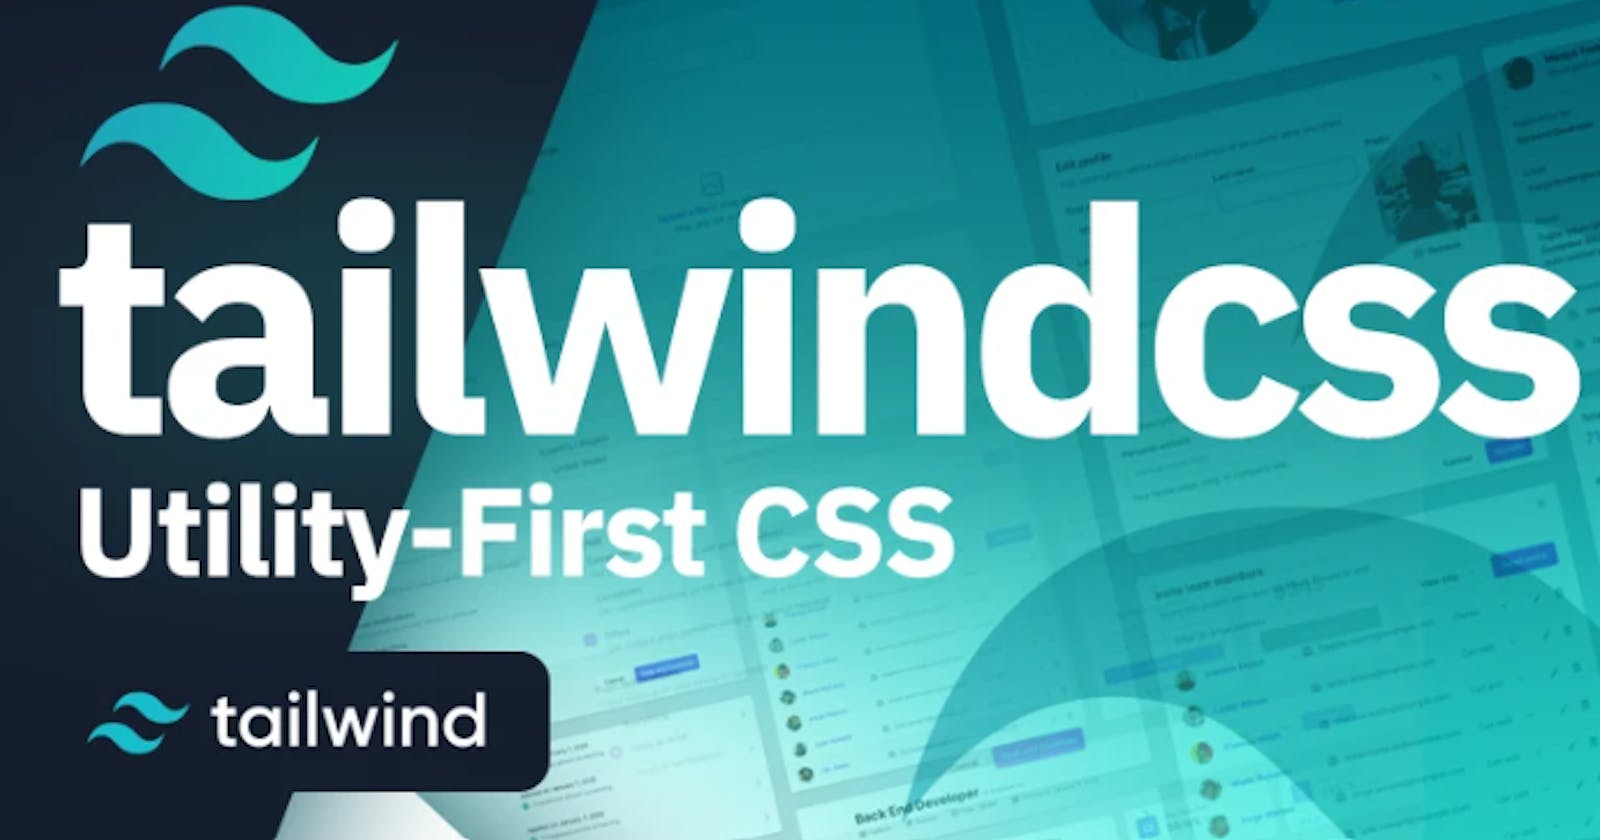 Why I'm in love with Tailwind-CSS!!!